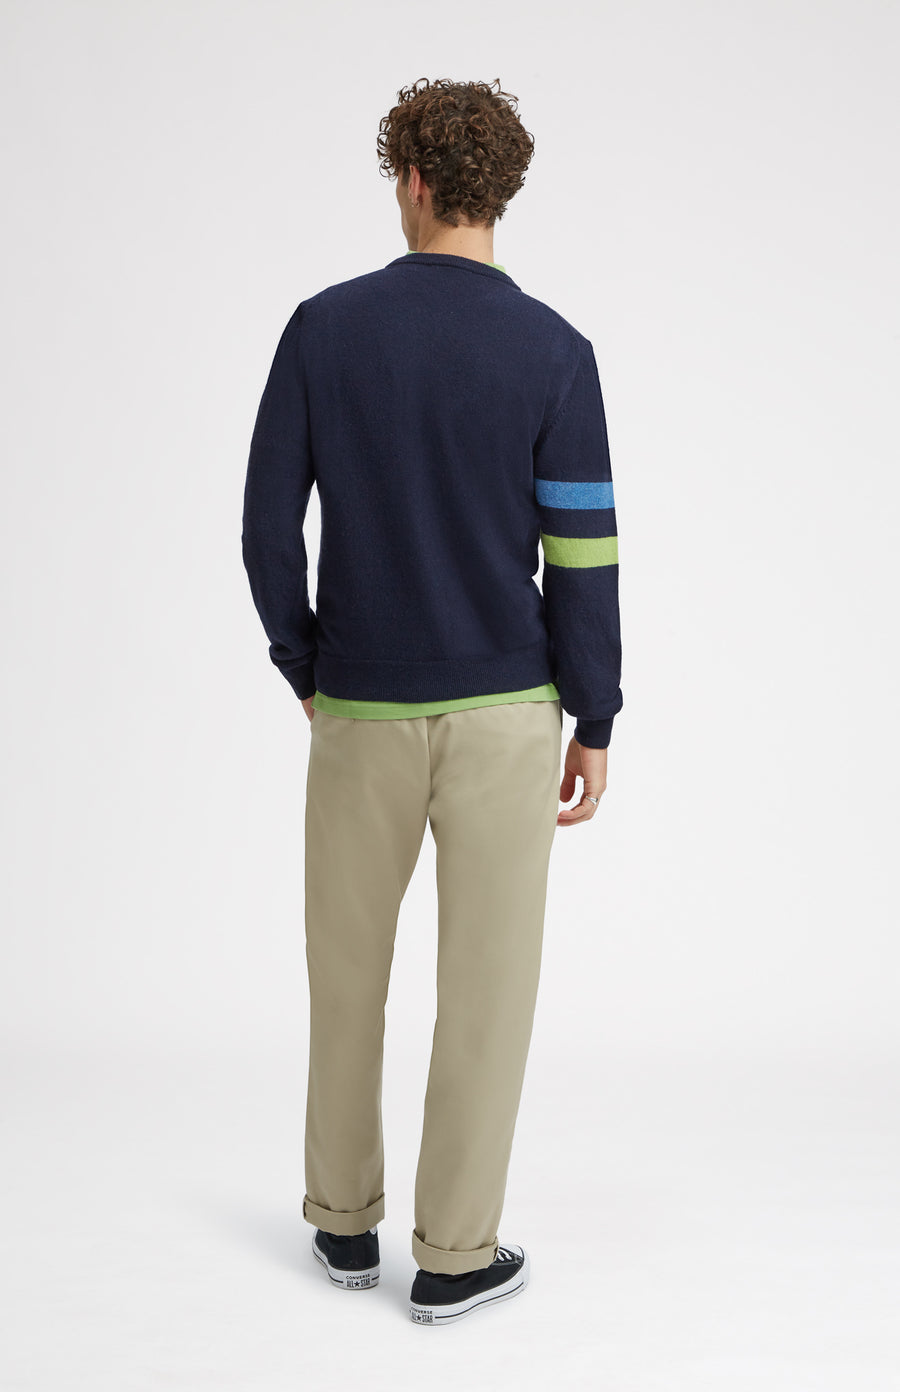 Round Neck Geometric George Golf Jumper in Navy rear view - Pringle of Scotland